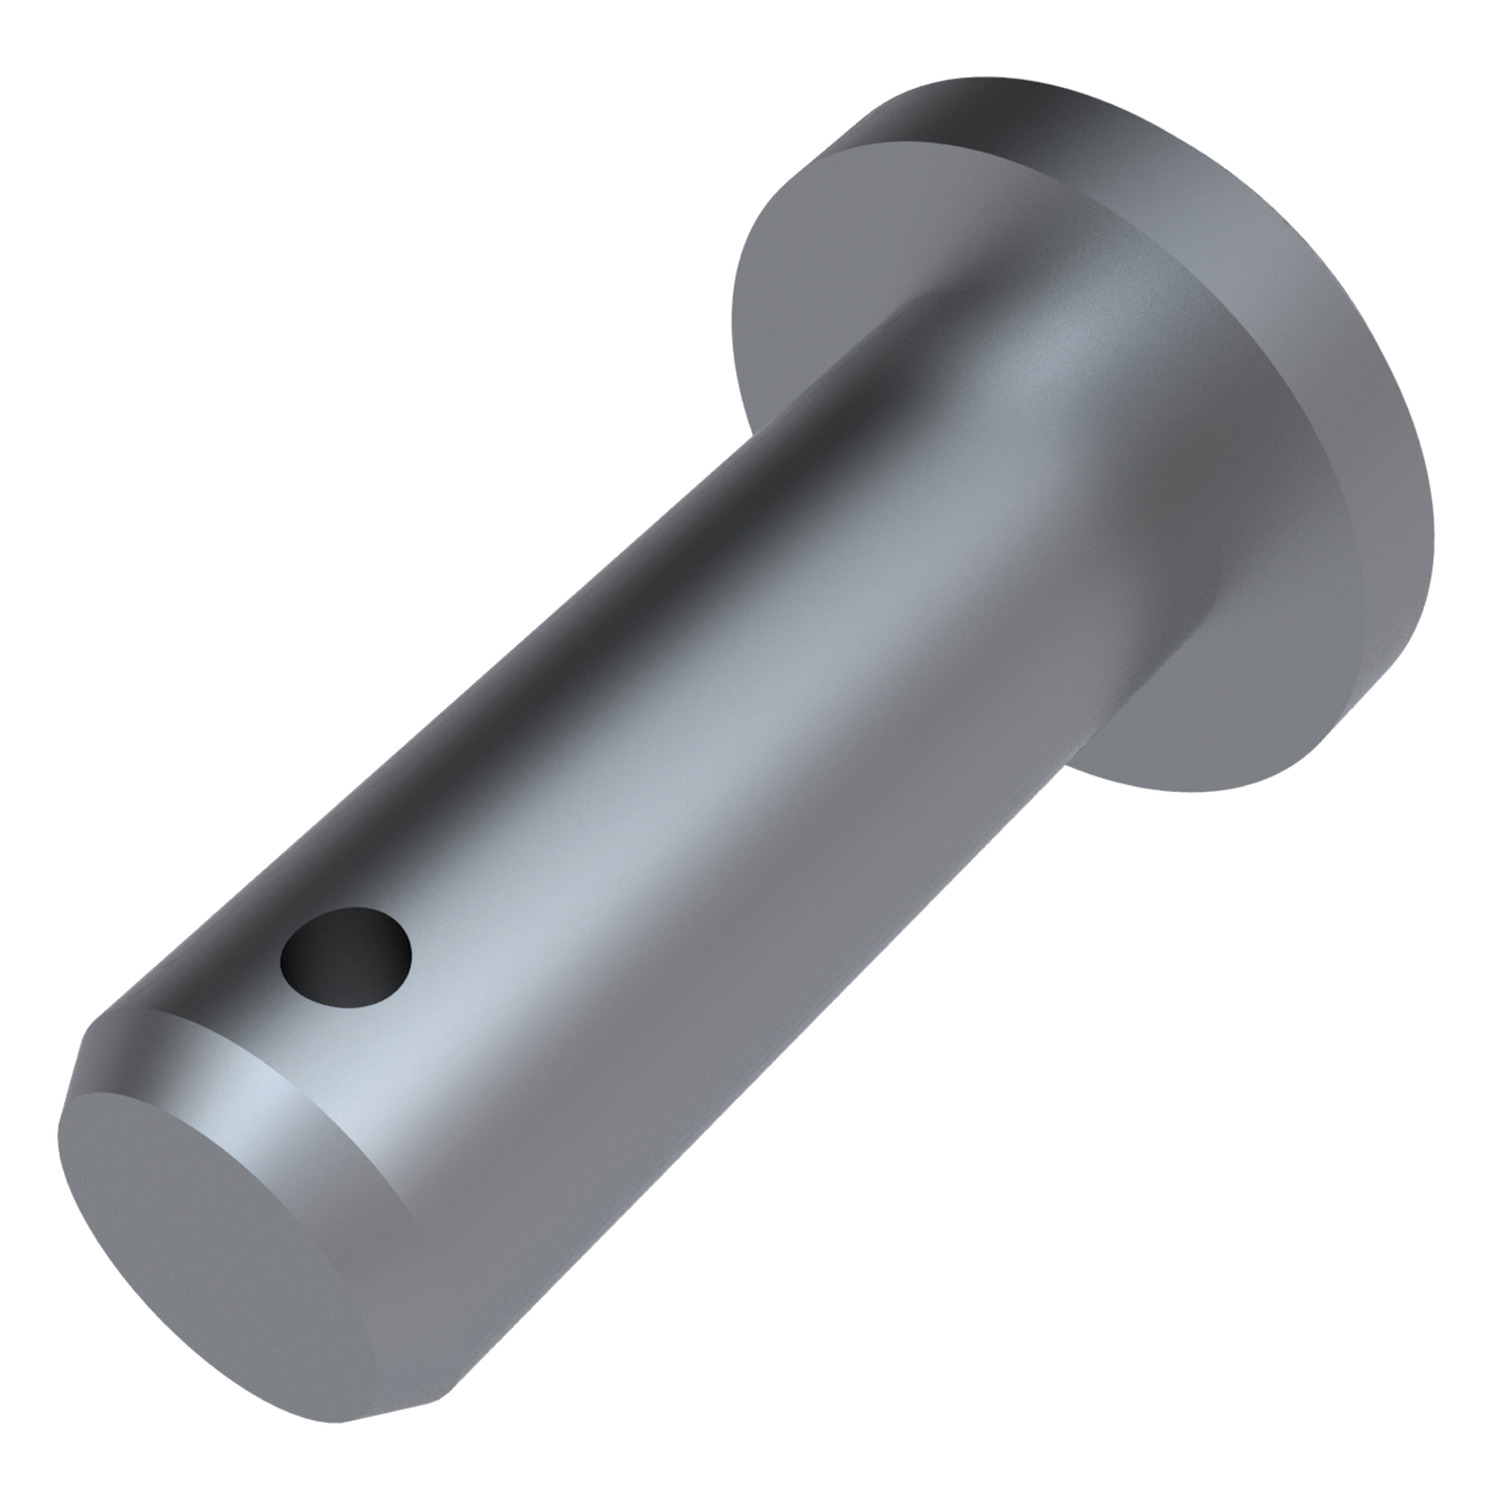 Stainless Clevis Pin With Hole Made from stainless steel (1.4305, X8CrNiS18-9) for sizes 6-8. Stainless steel (1.4567, X3CrNiCu18-9-4)